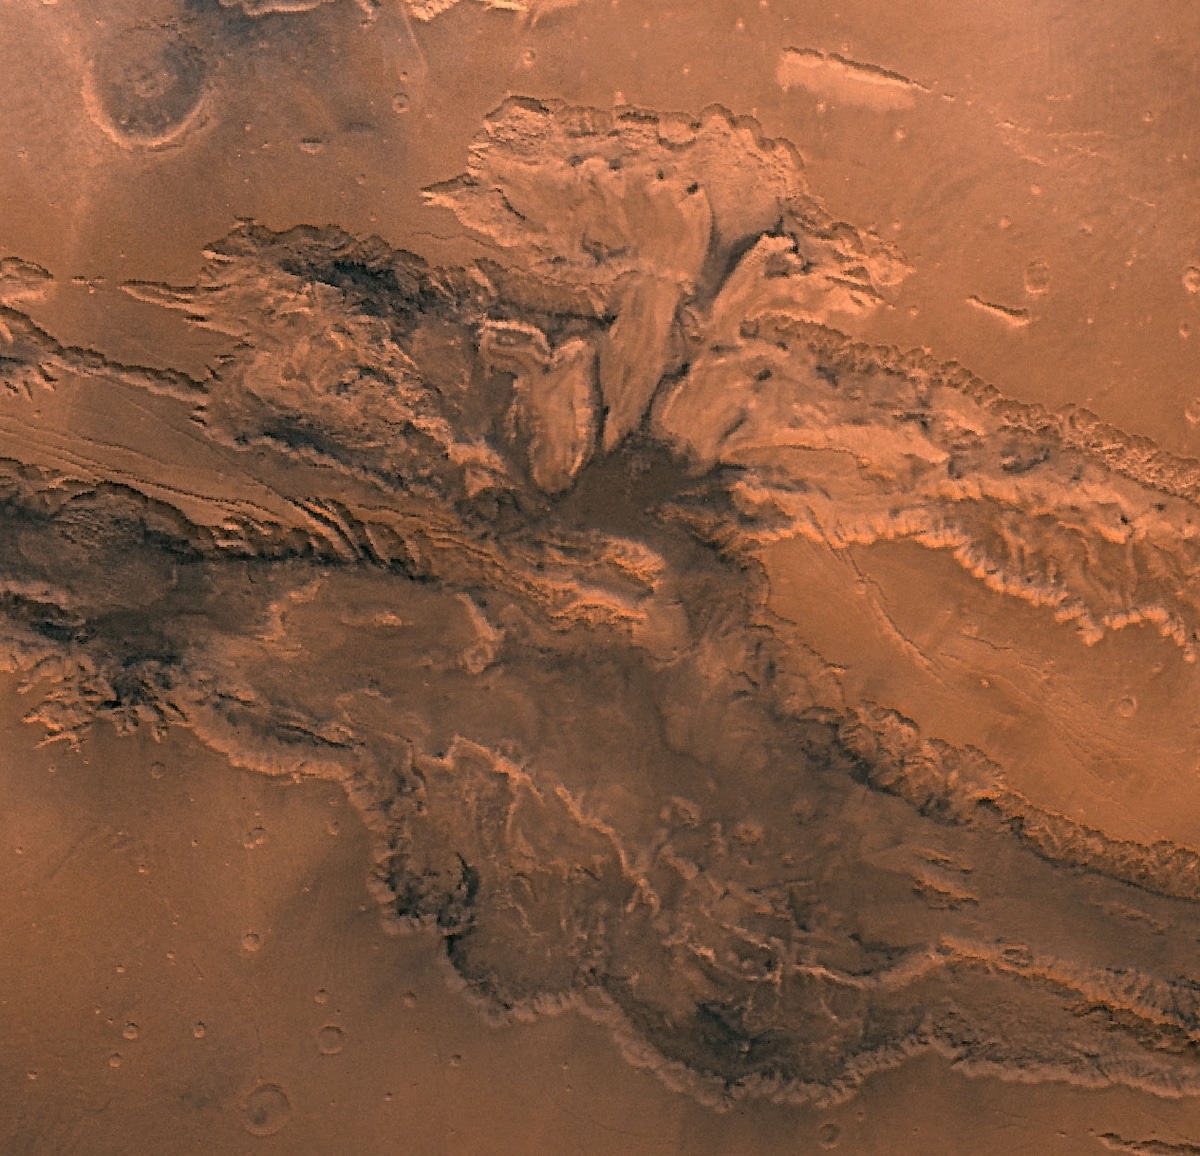 Valles Marineris Mars Grand Canyon Shown In Spectacular Detail